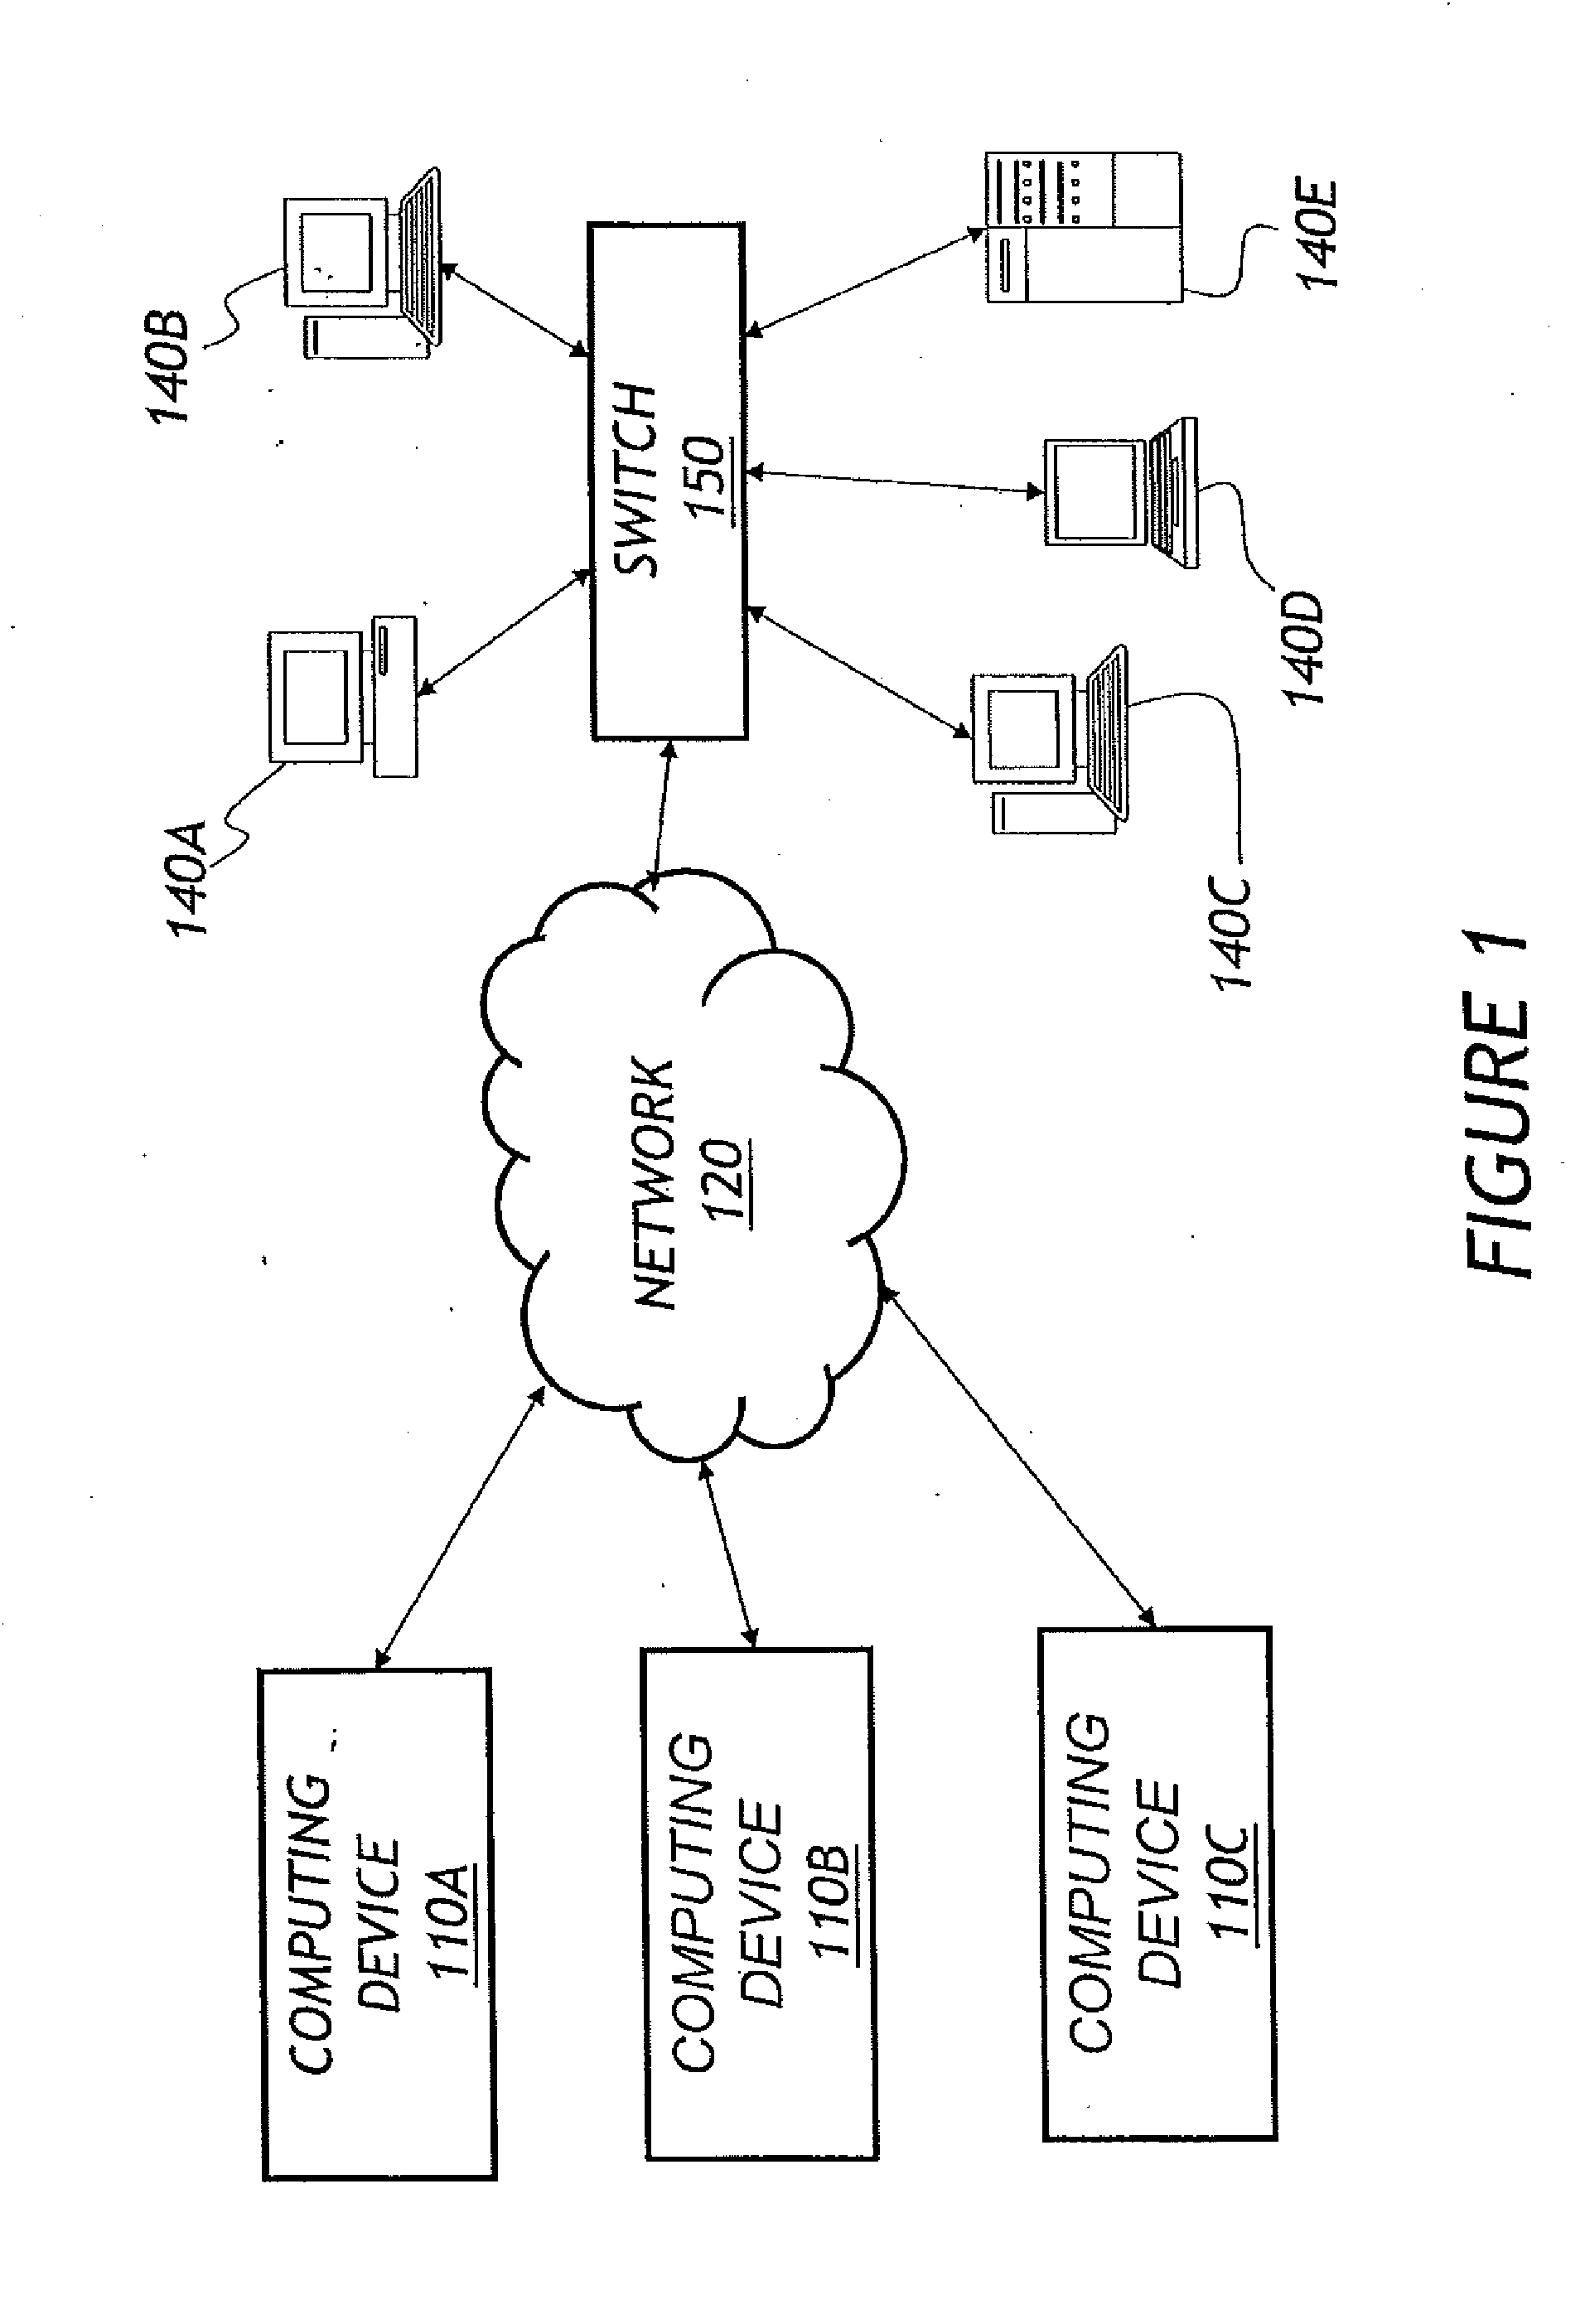 Systems and methods for processing access control lists (ACLS) in network switches using regular expression matching logic